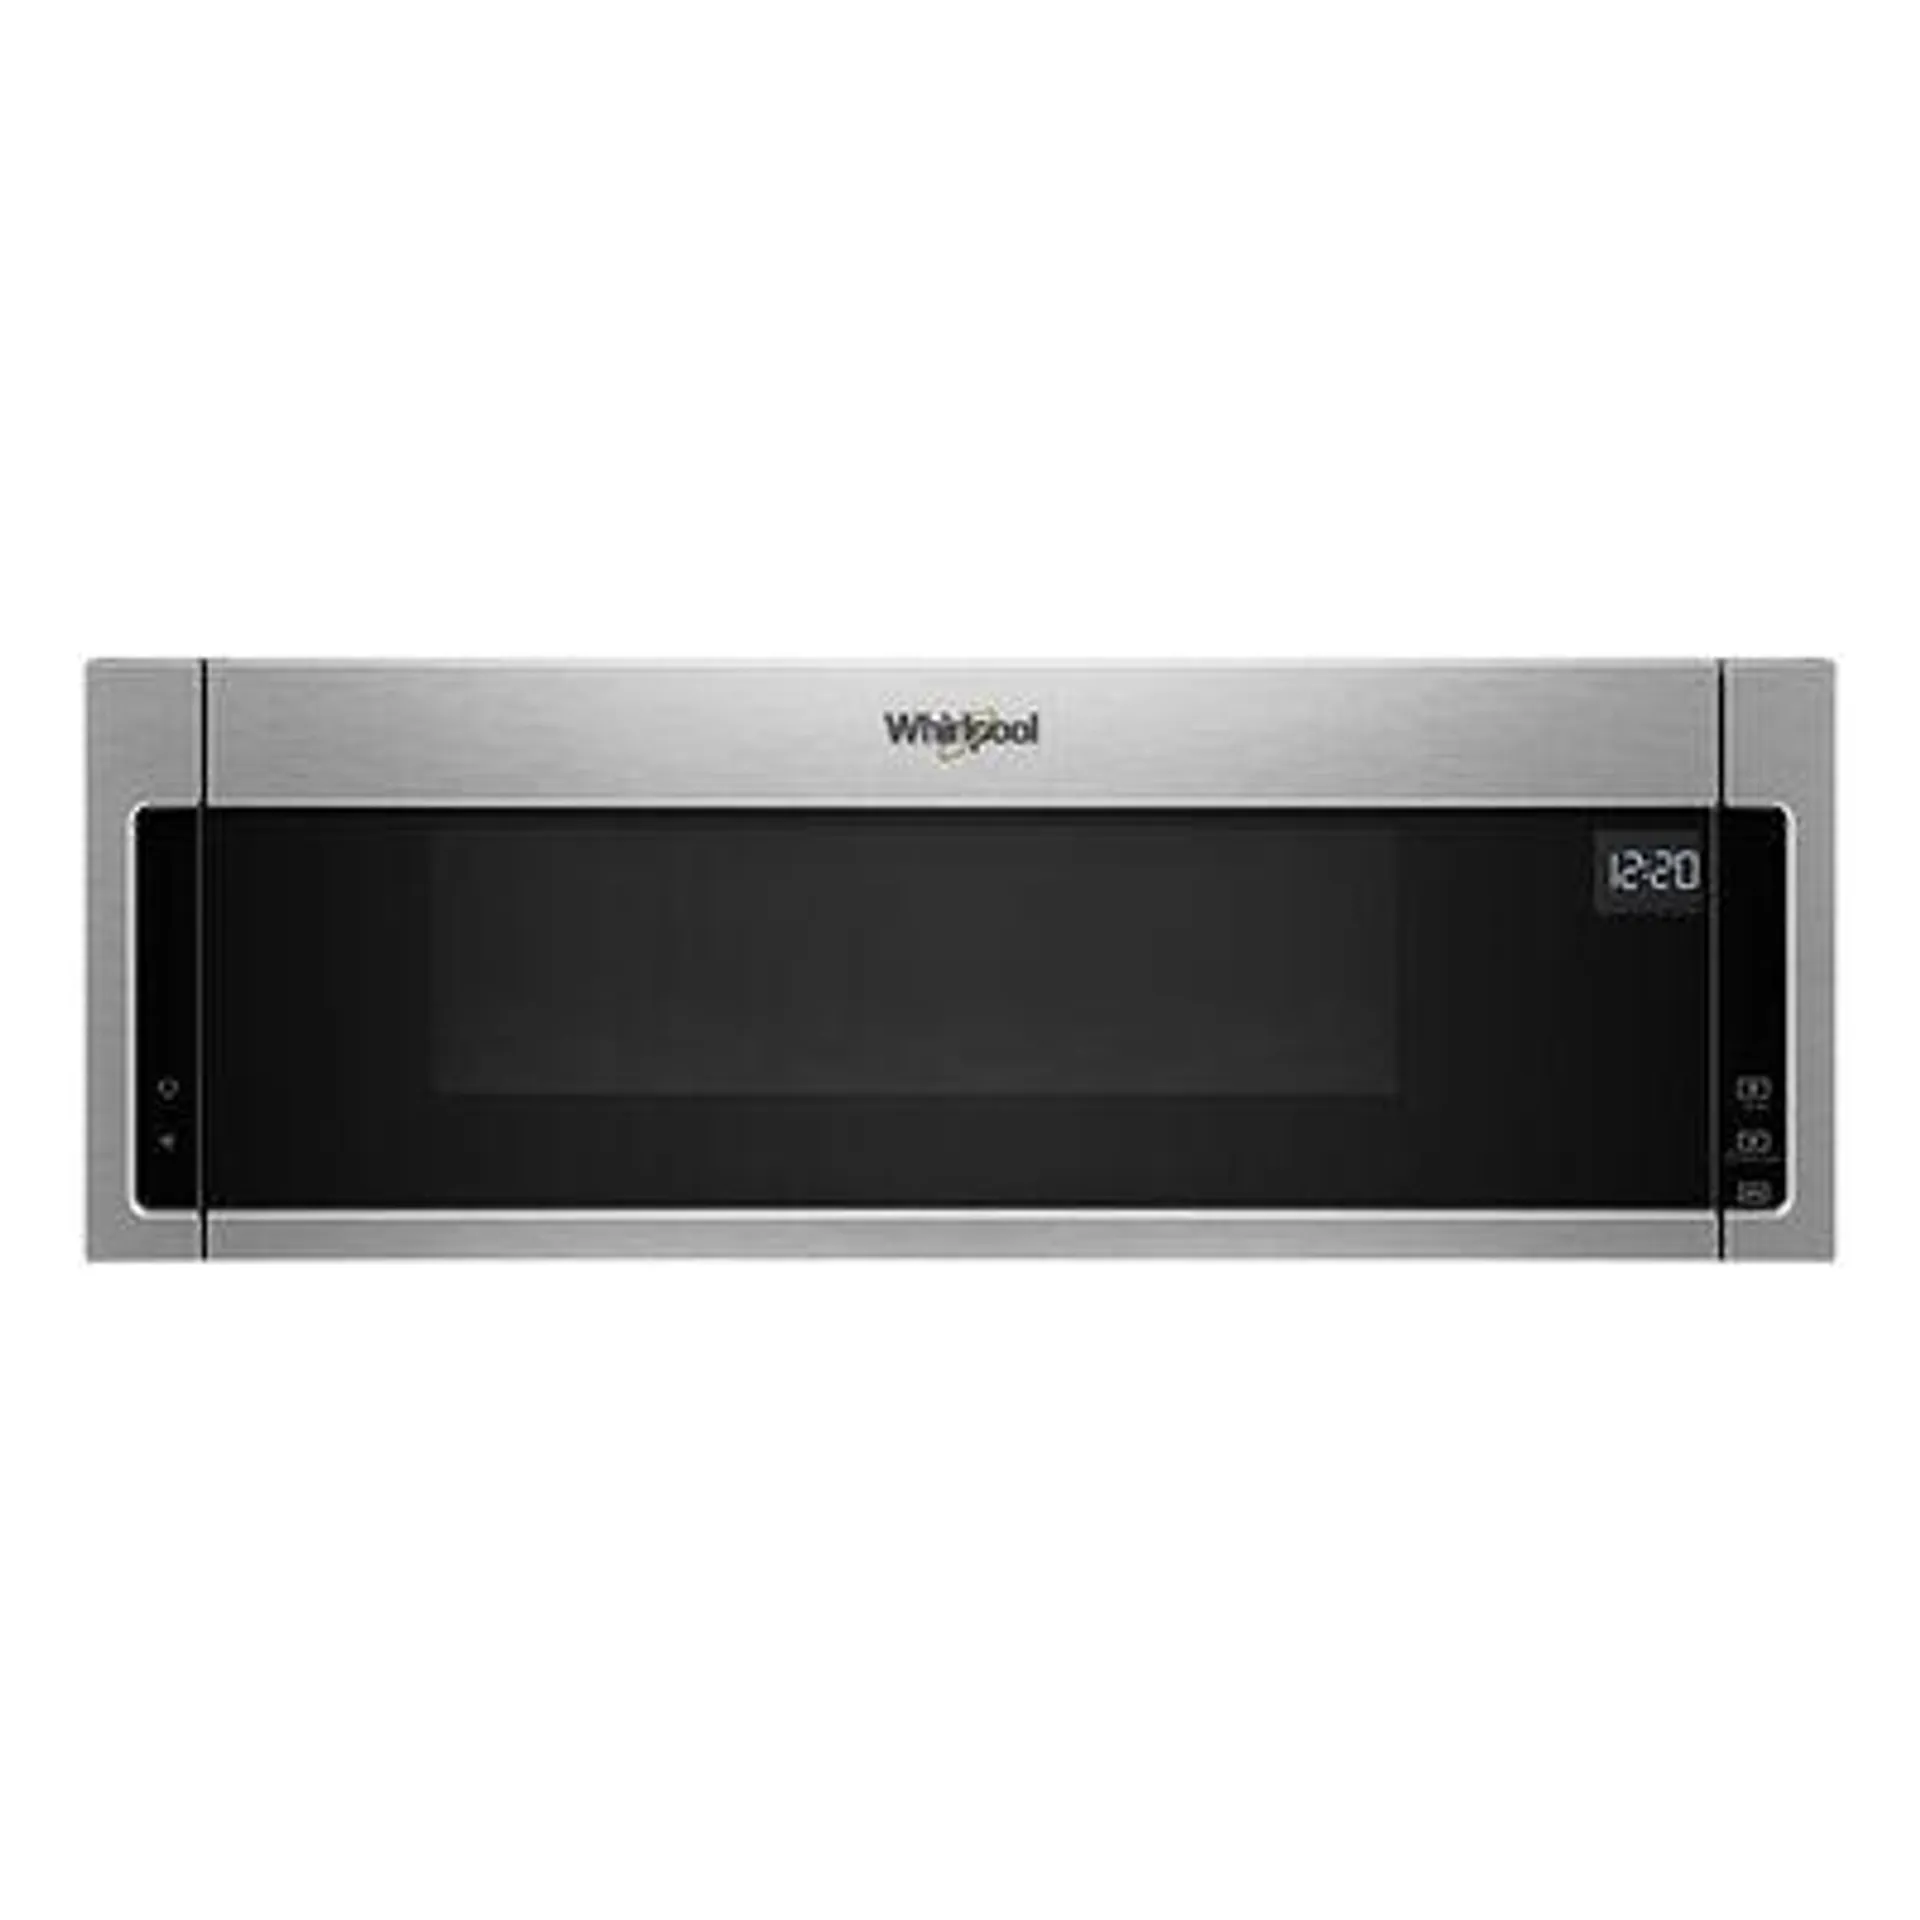 Whirlpool 30" 1.1 Cu. Ft. Over-the-Range Microwave with 10 Power Levels & 400 CFM - Heritage Stainless Steel